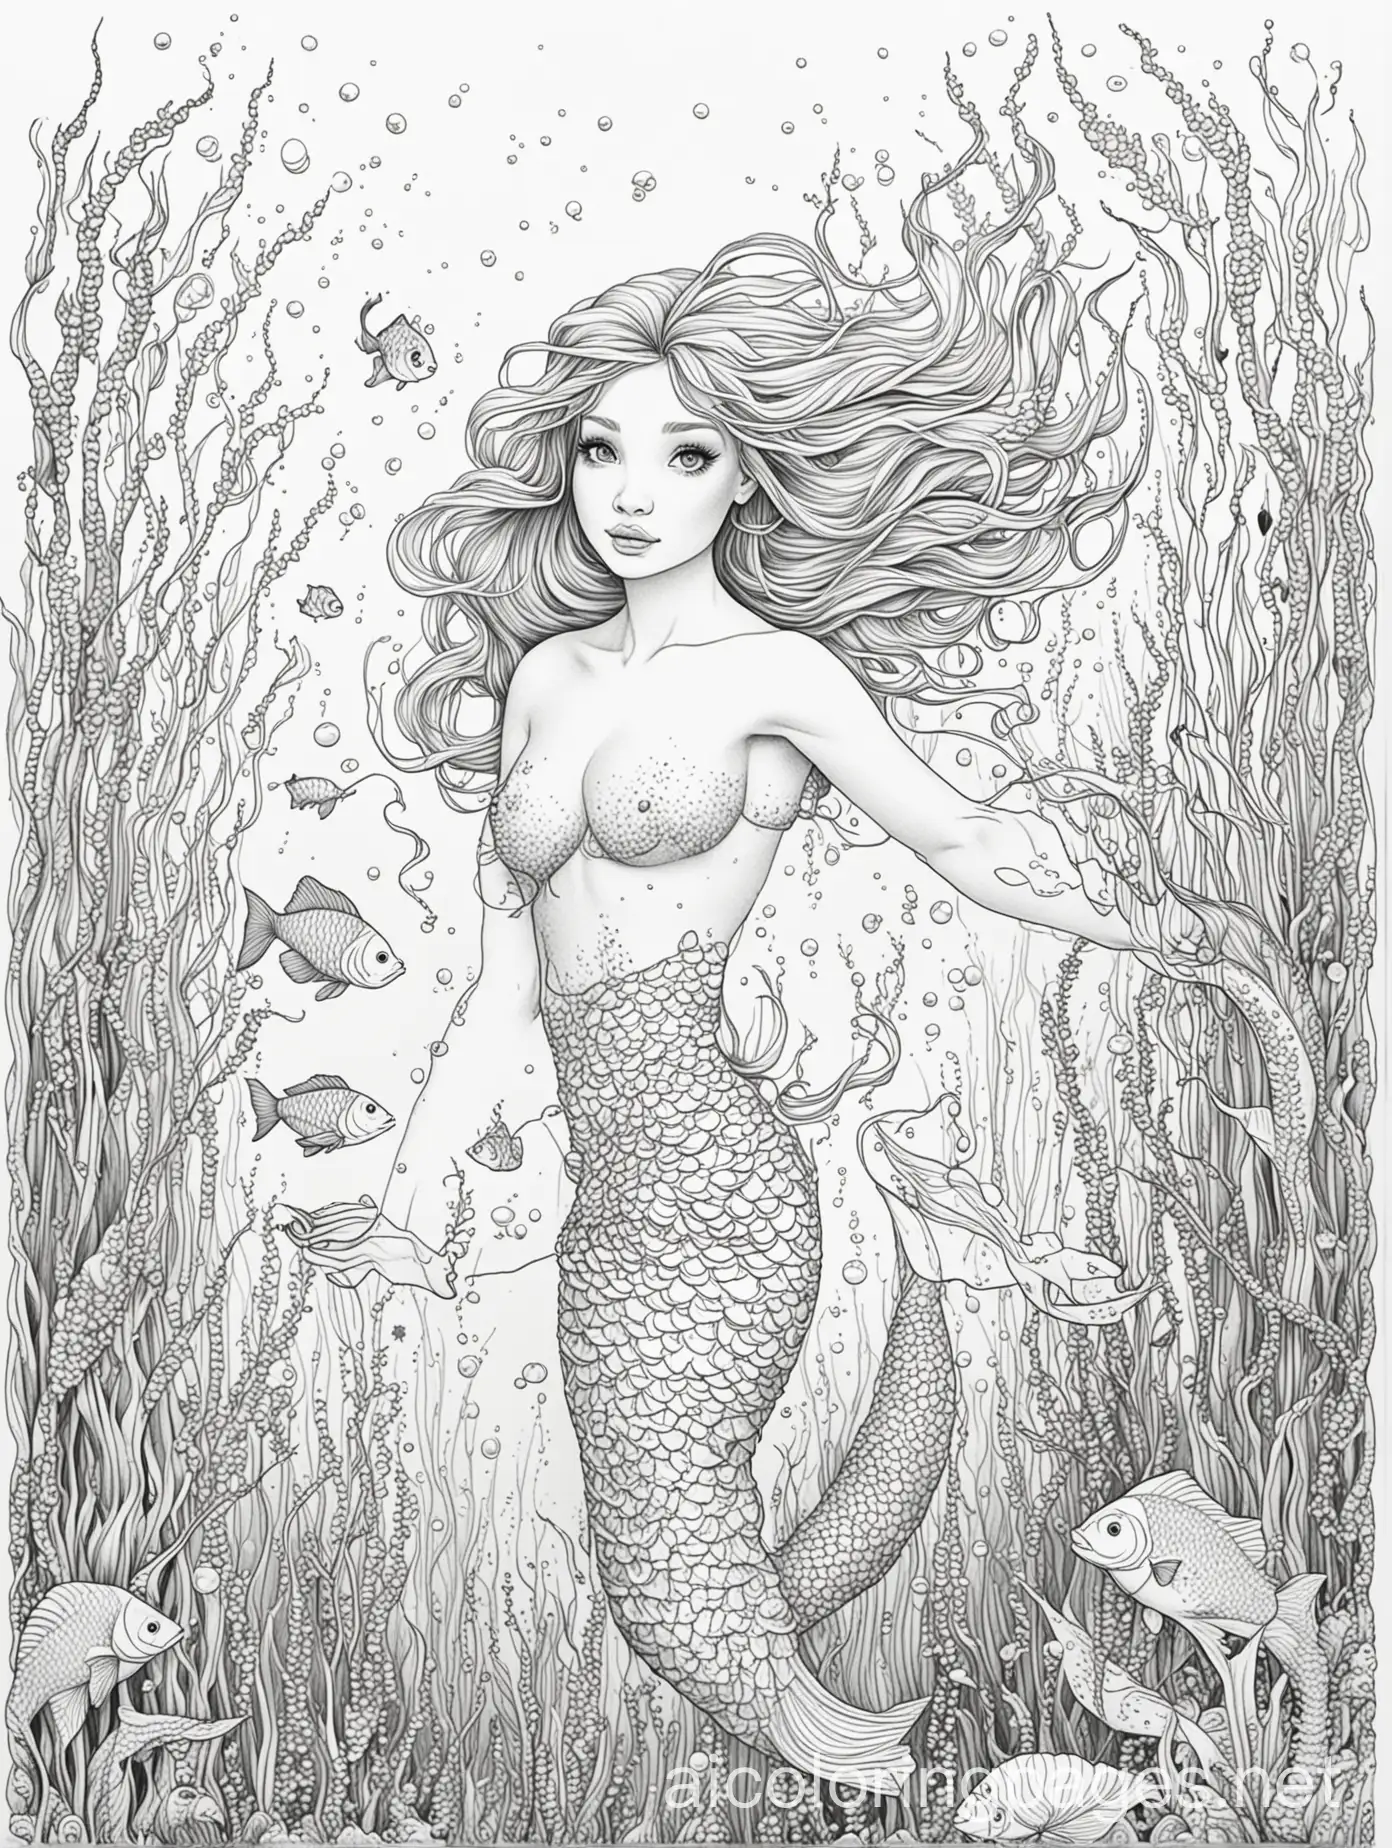 Mermaid-Swimming-Through-Seaweed-with-Fish-Coloring-Page-for-Relaxation-and-Creativity